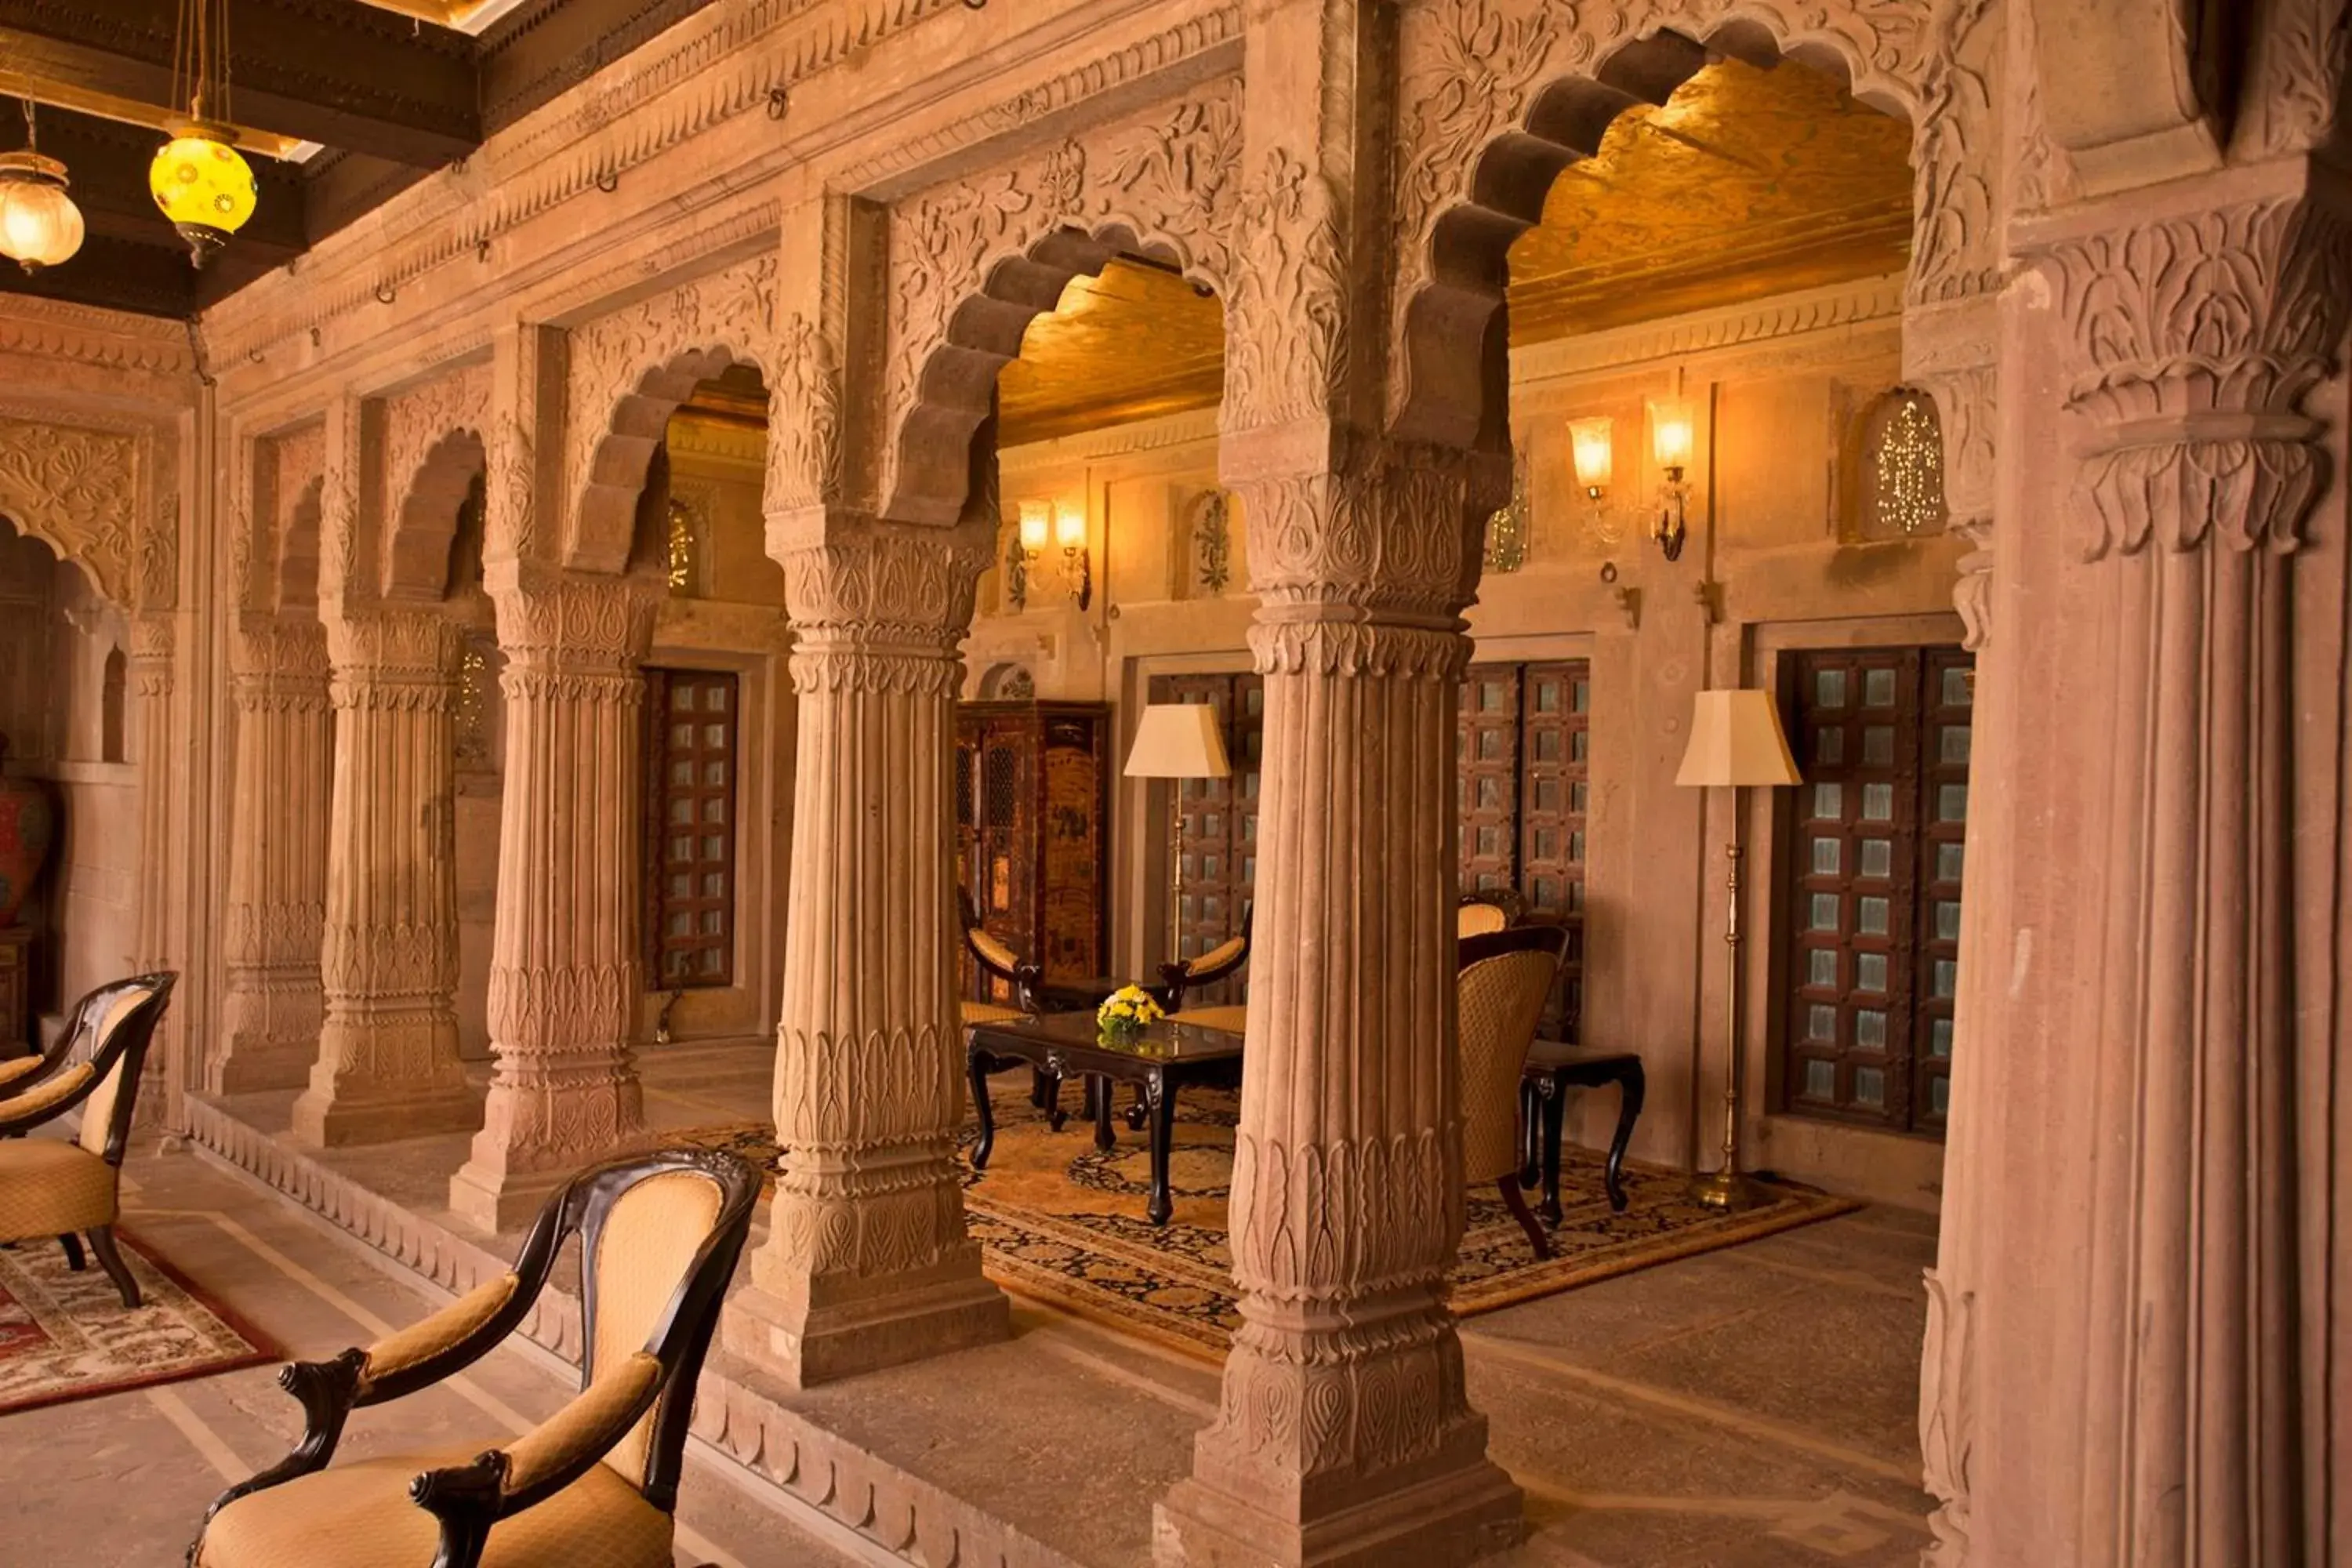 Living room, Seating Area in BrijRama Palace, Varanasi by the Ganges